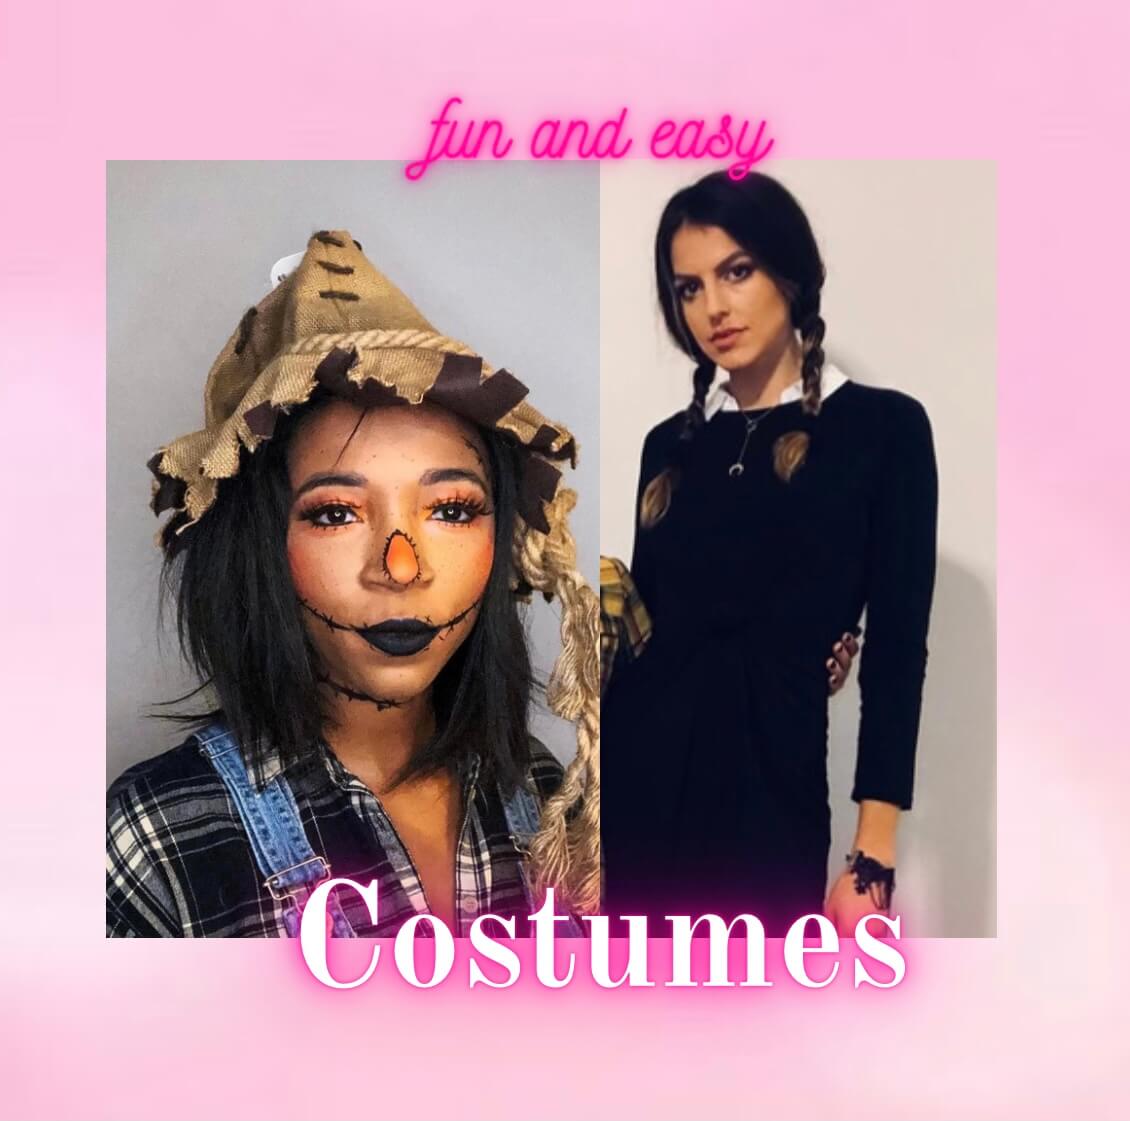 Image of Sara and Maddie in Halloween Costumes